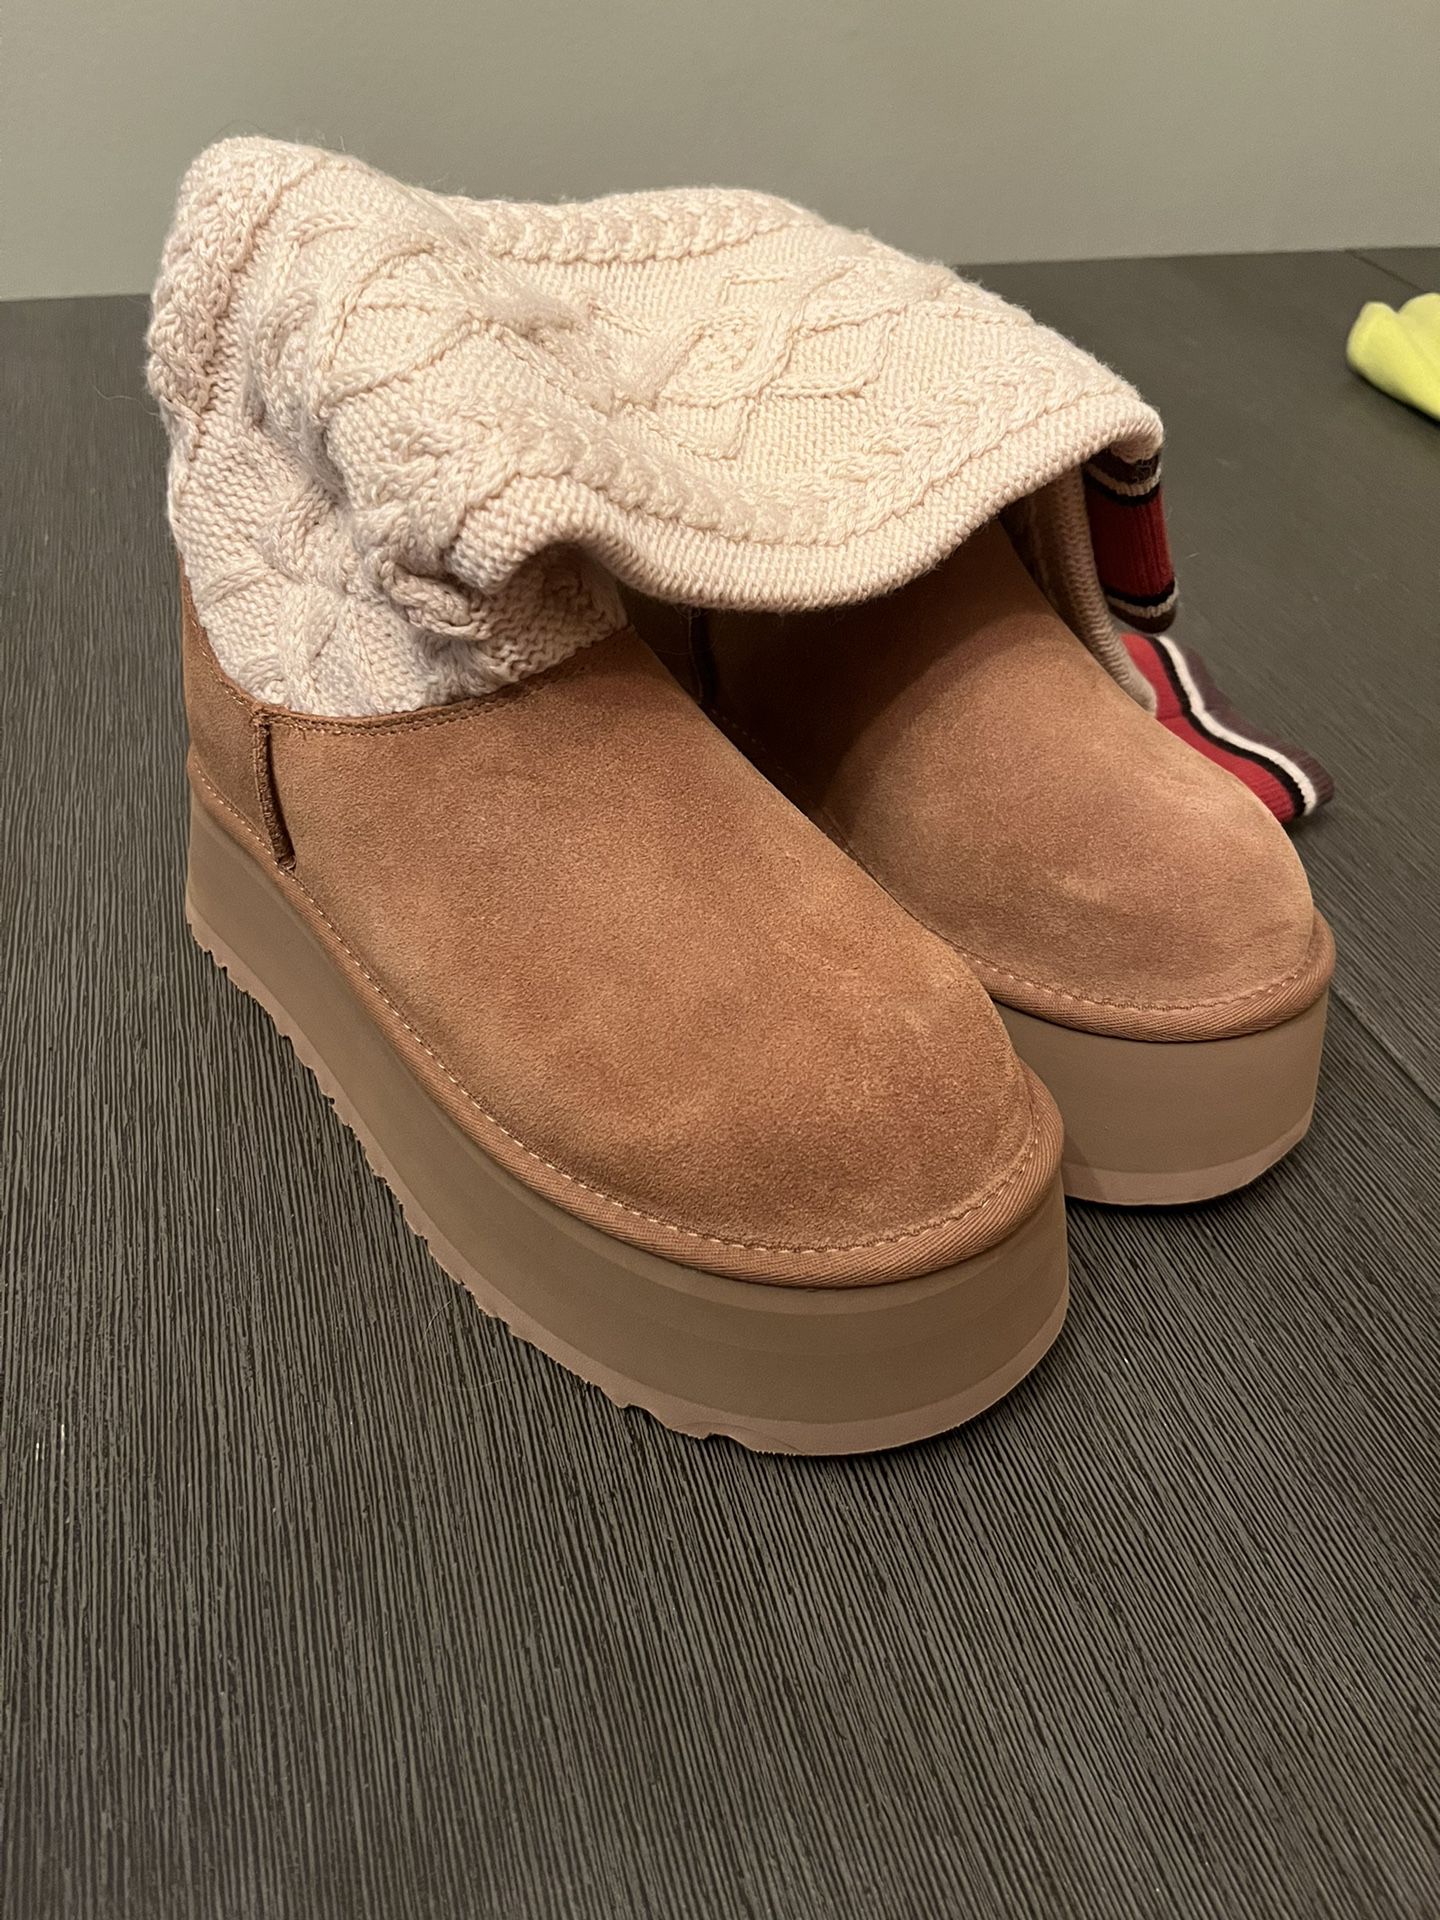 sweater letter uggs 